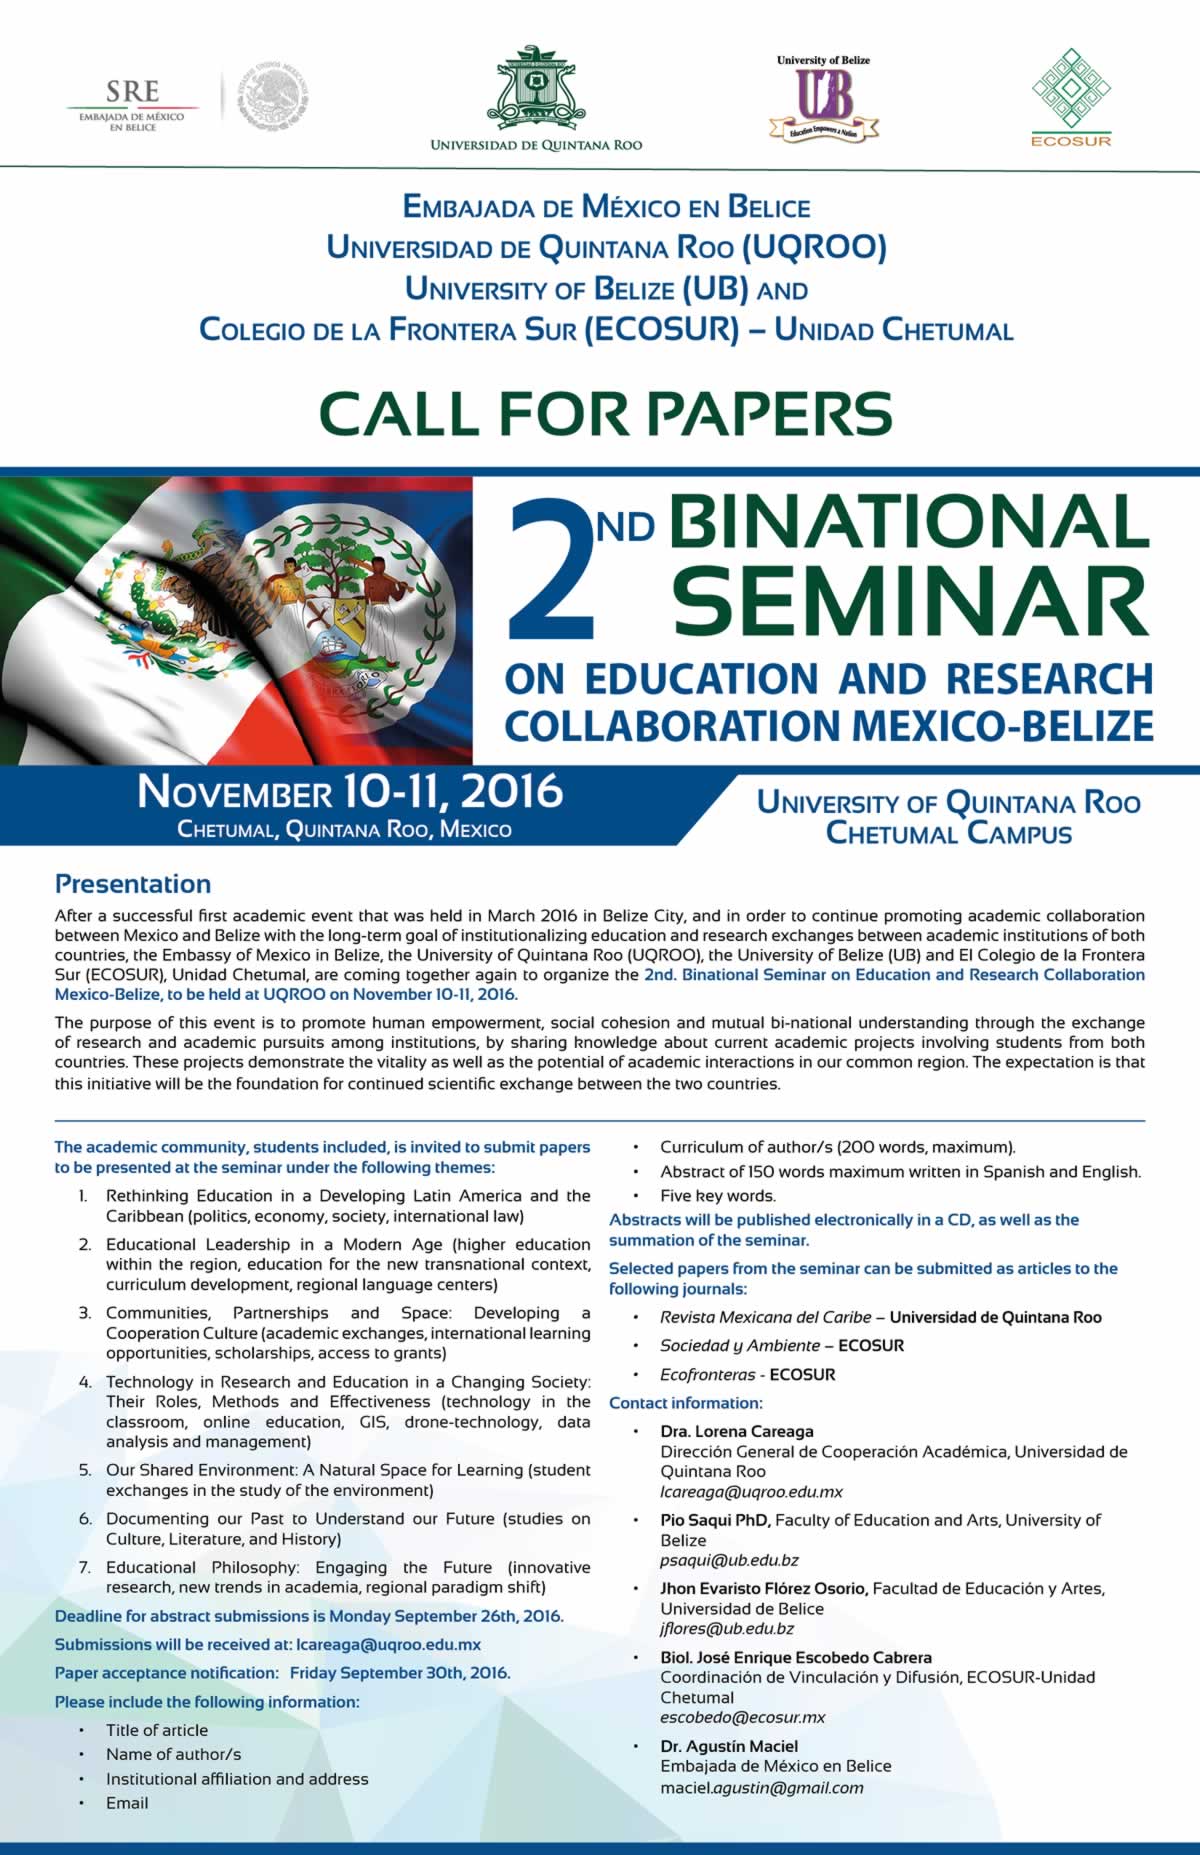 II-binational-seminar-on-education-and-research-mexico-belize.jpg